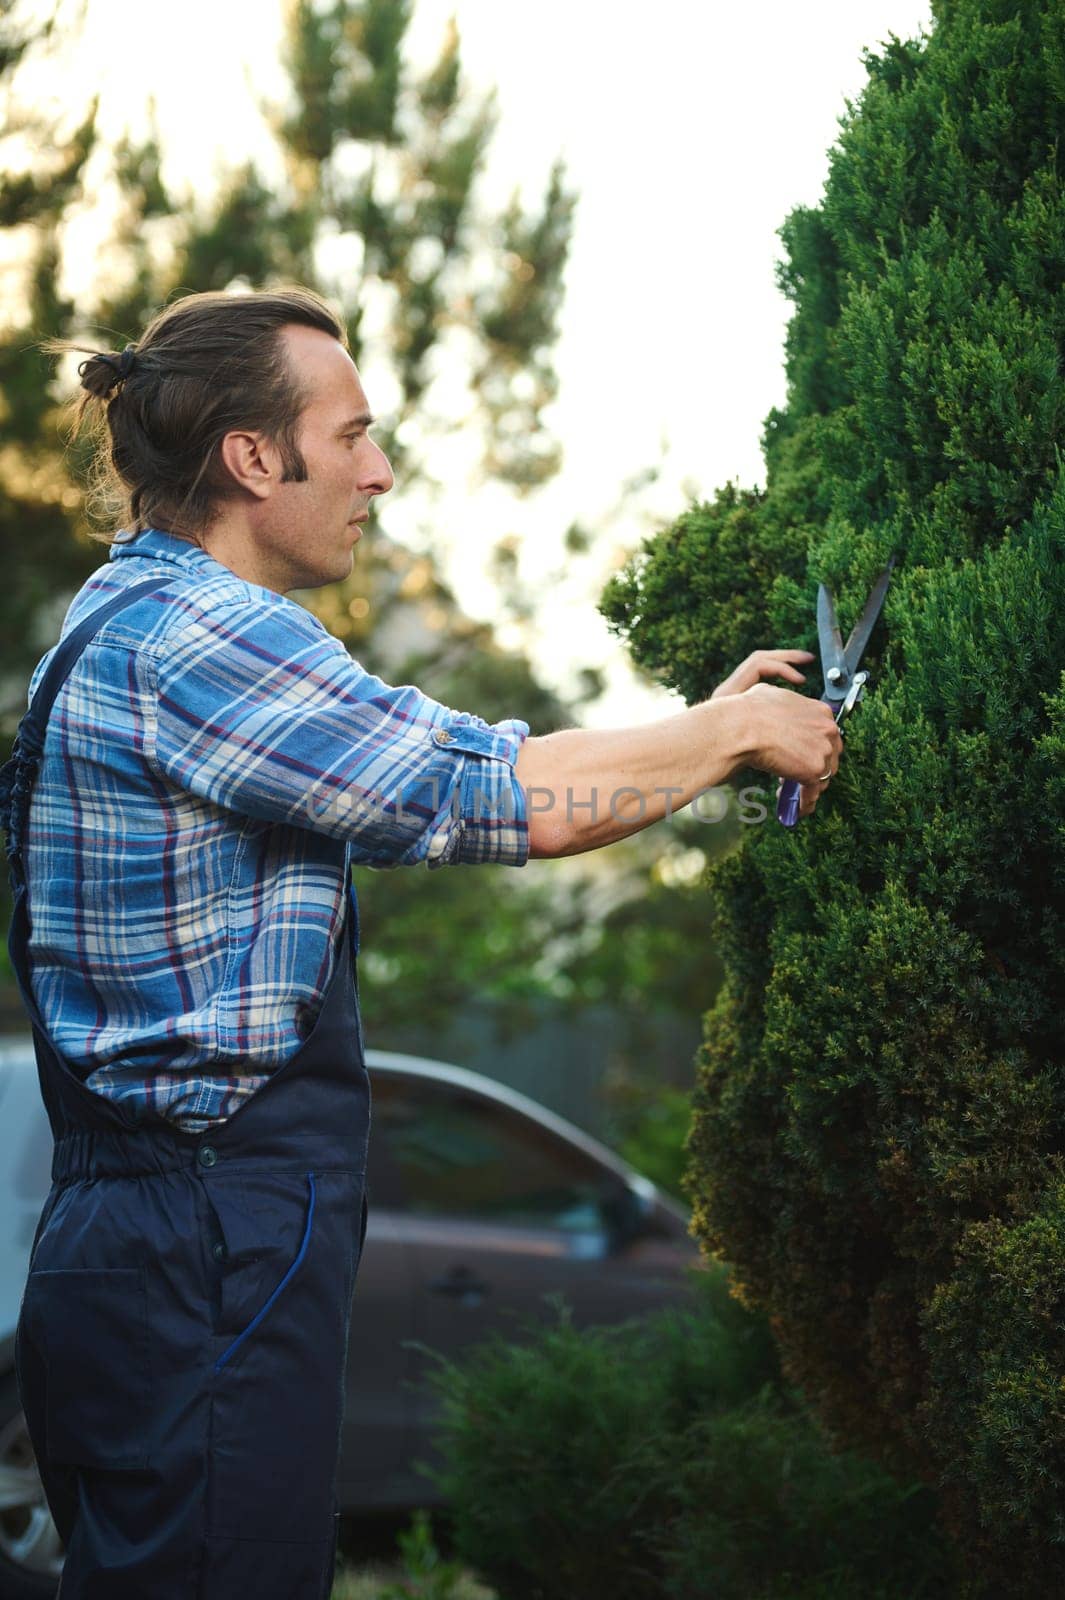 Side waist up portrait of Latin American man in work outfit, handsome competent professional male gardener pruning decorative bushes with trimming shears, maintaining the landscaping of mansion yard.